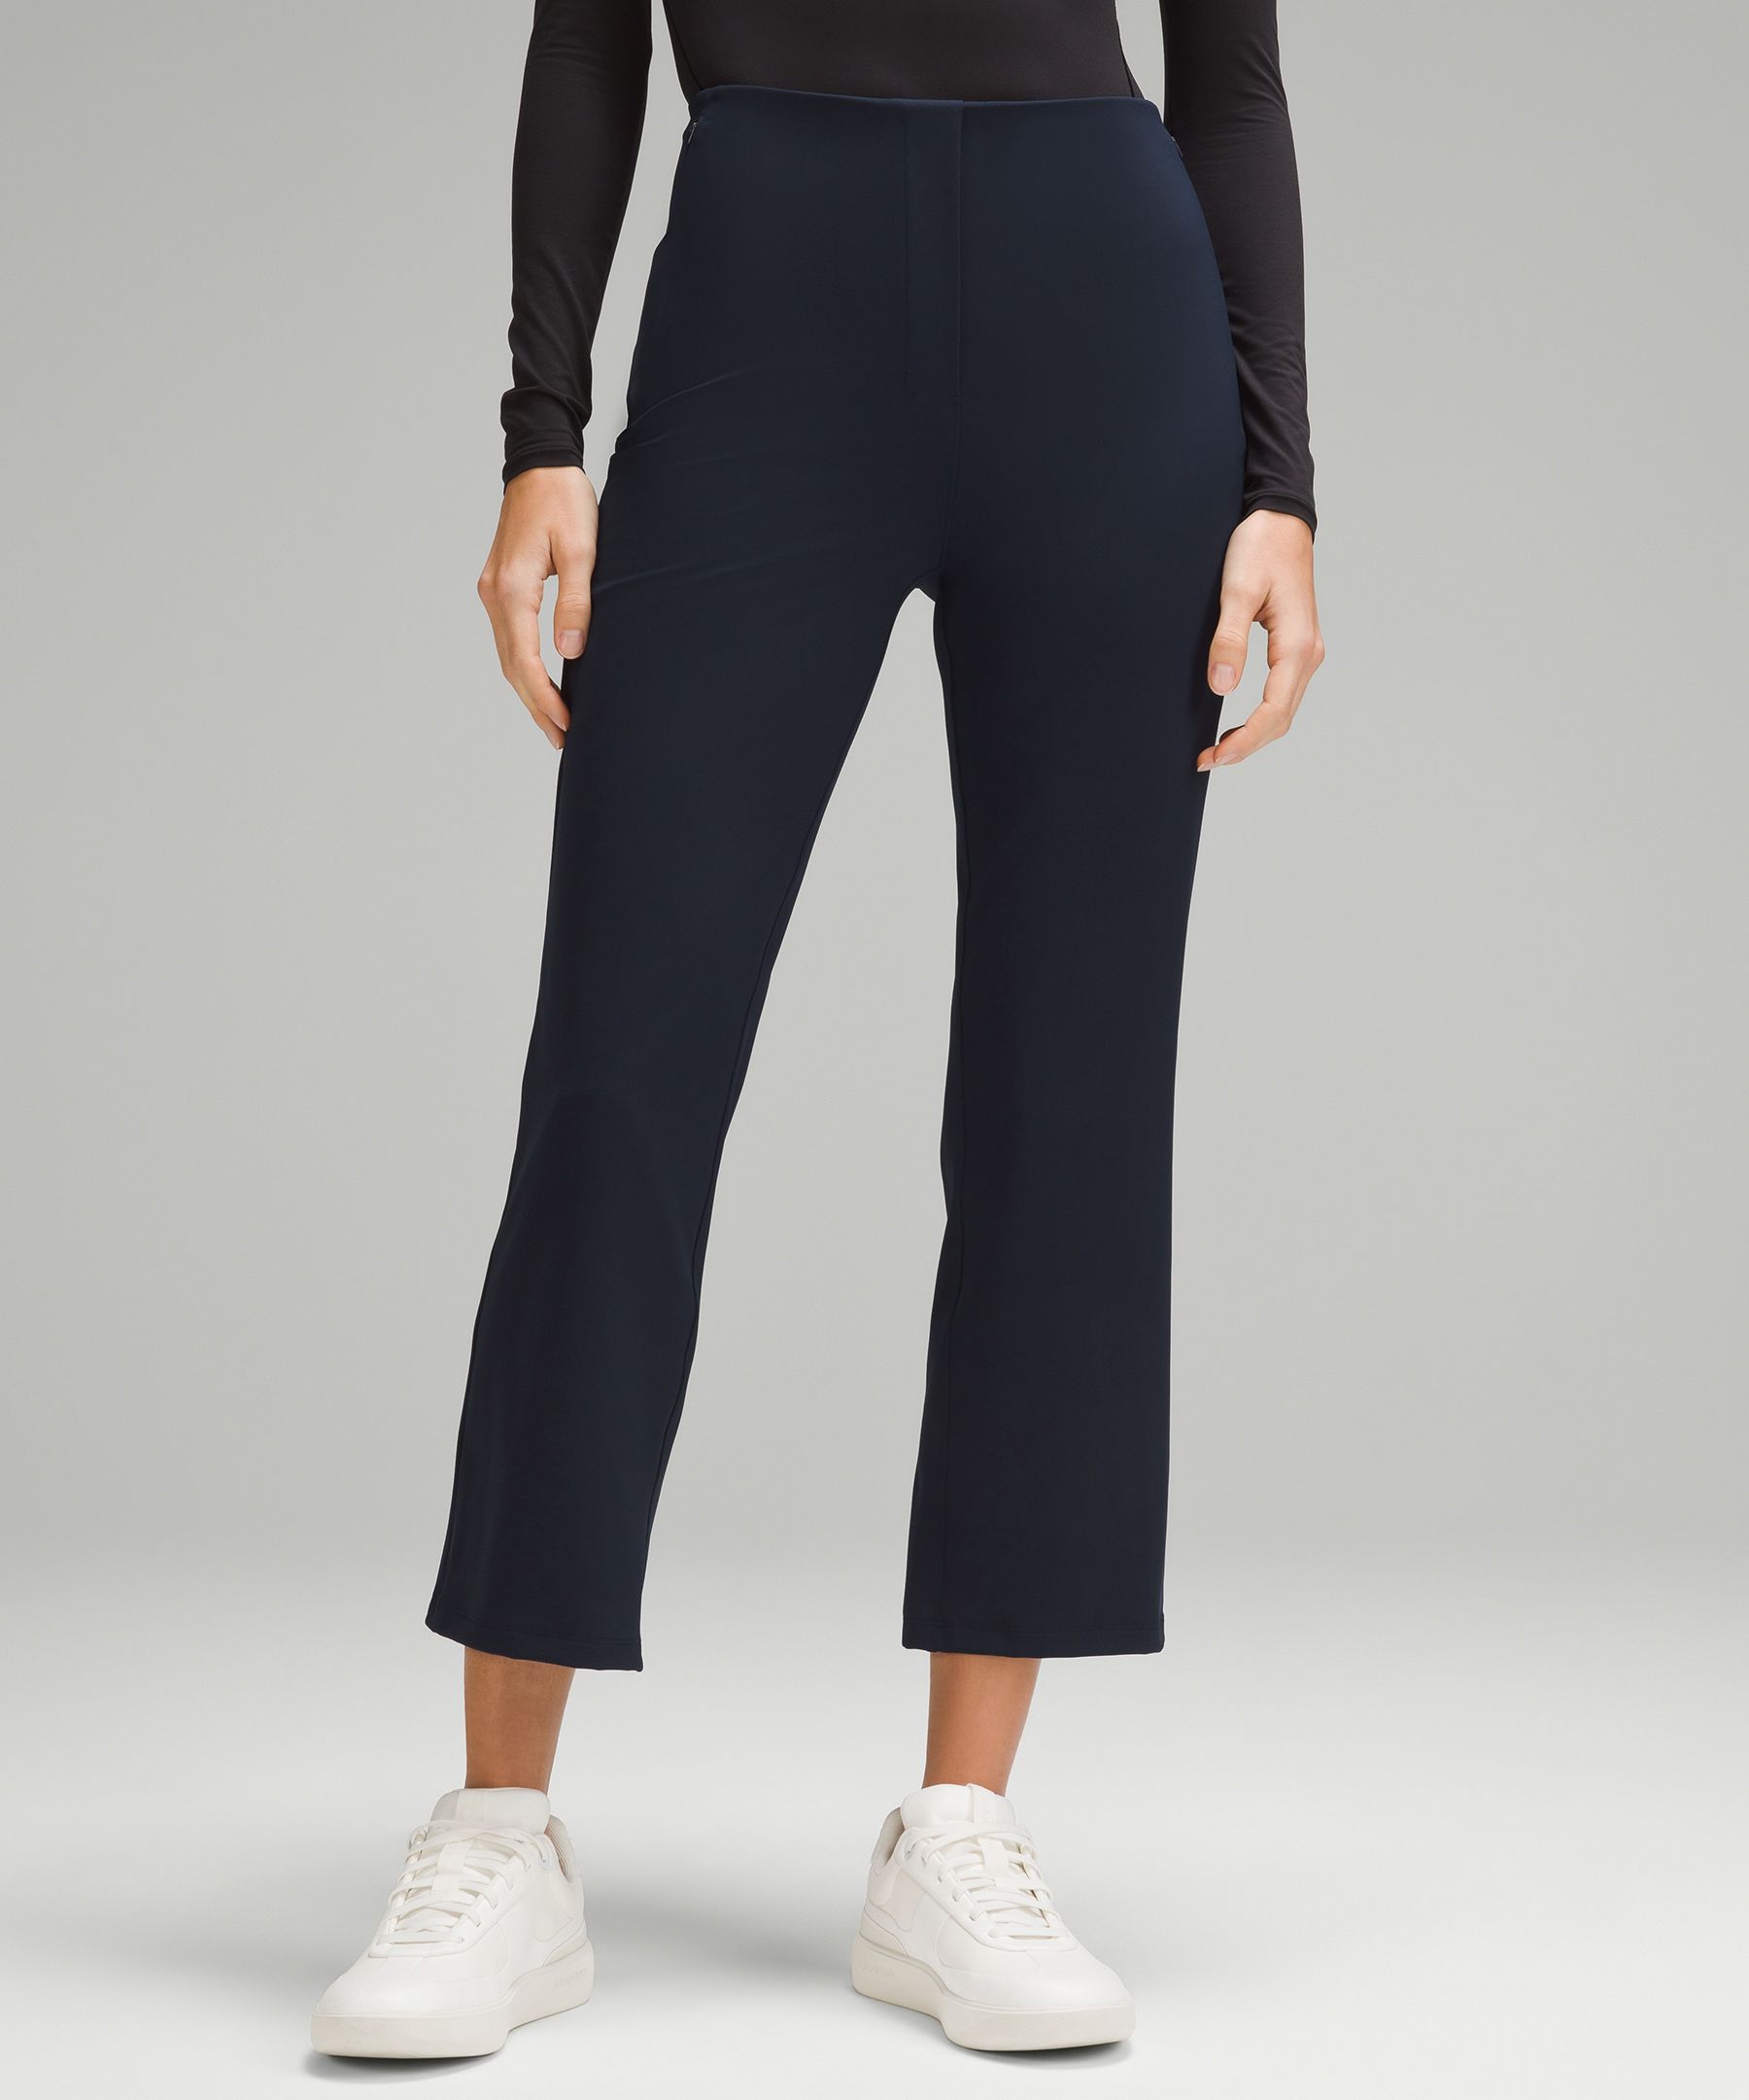 I tried on a size 2 in the smooth fit pull on pant from lululemon